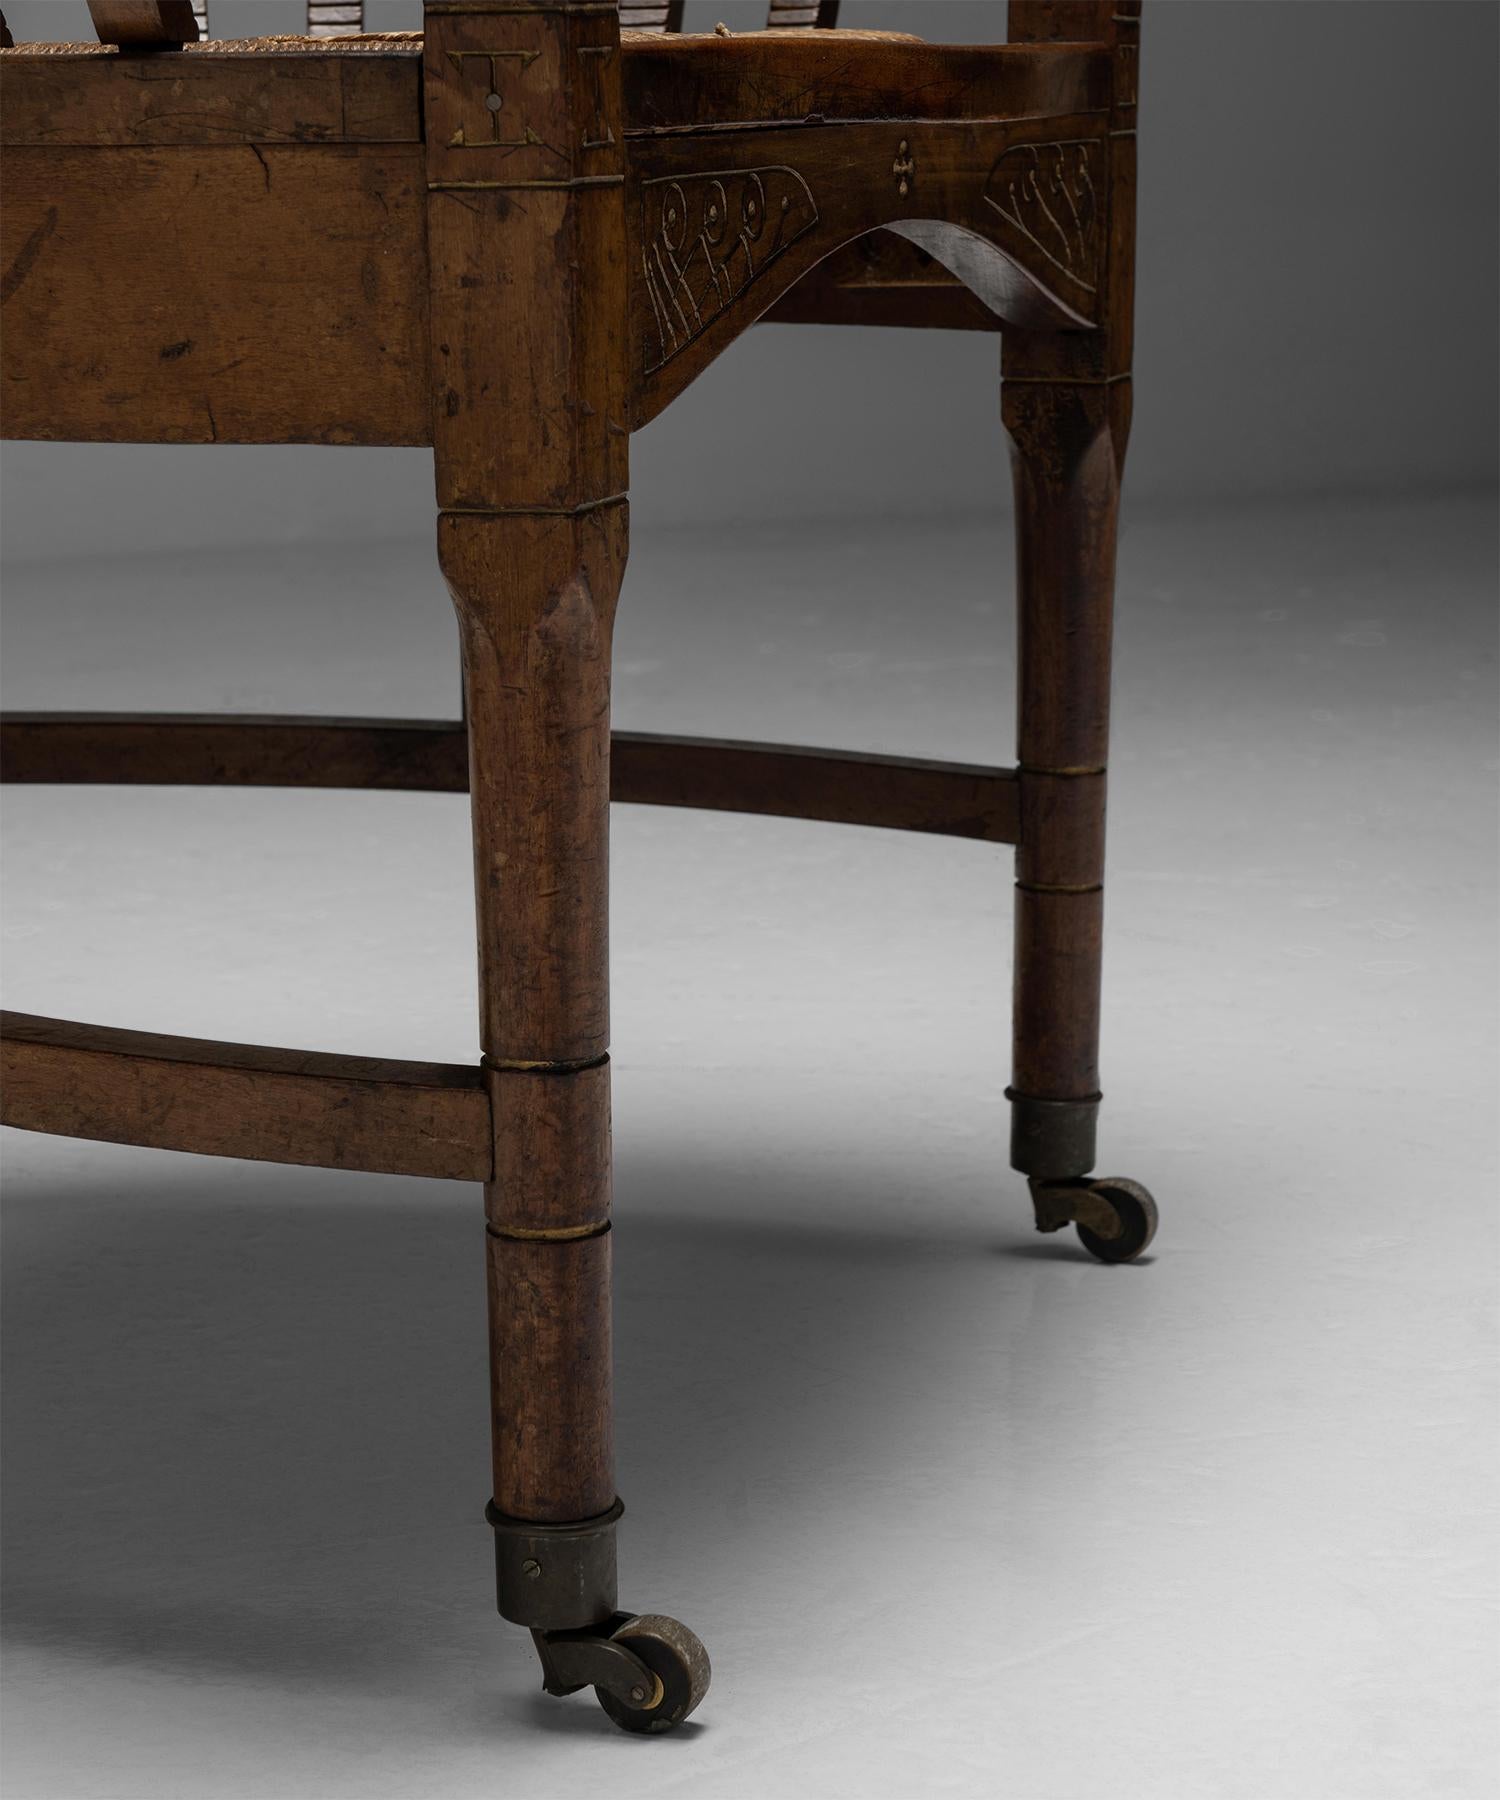 Upholstery Arts & Crafts Armchair No.2, France, Circa 1900